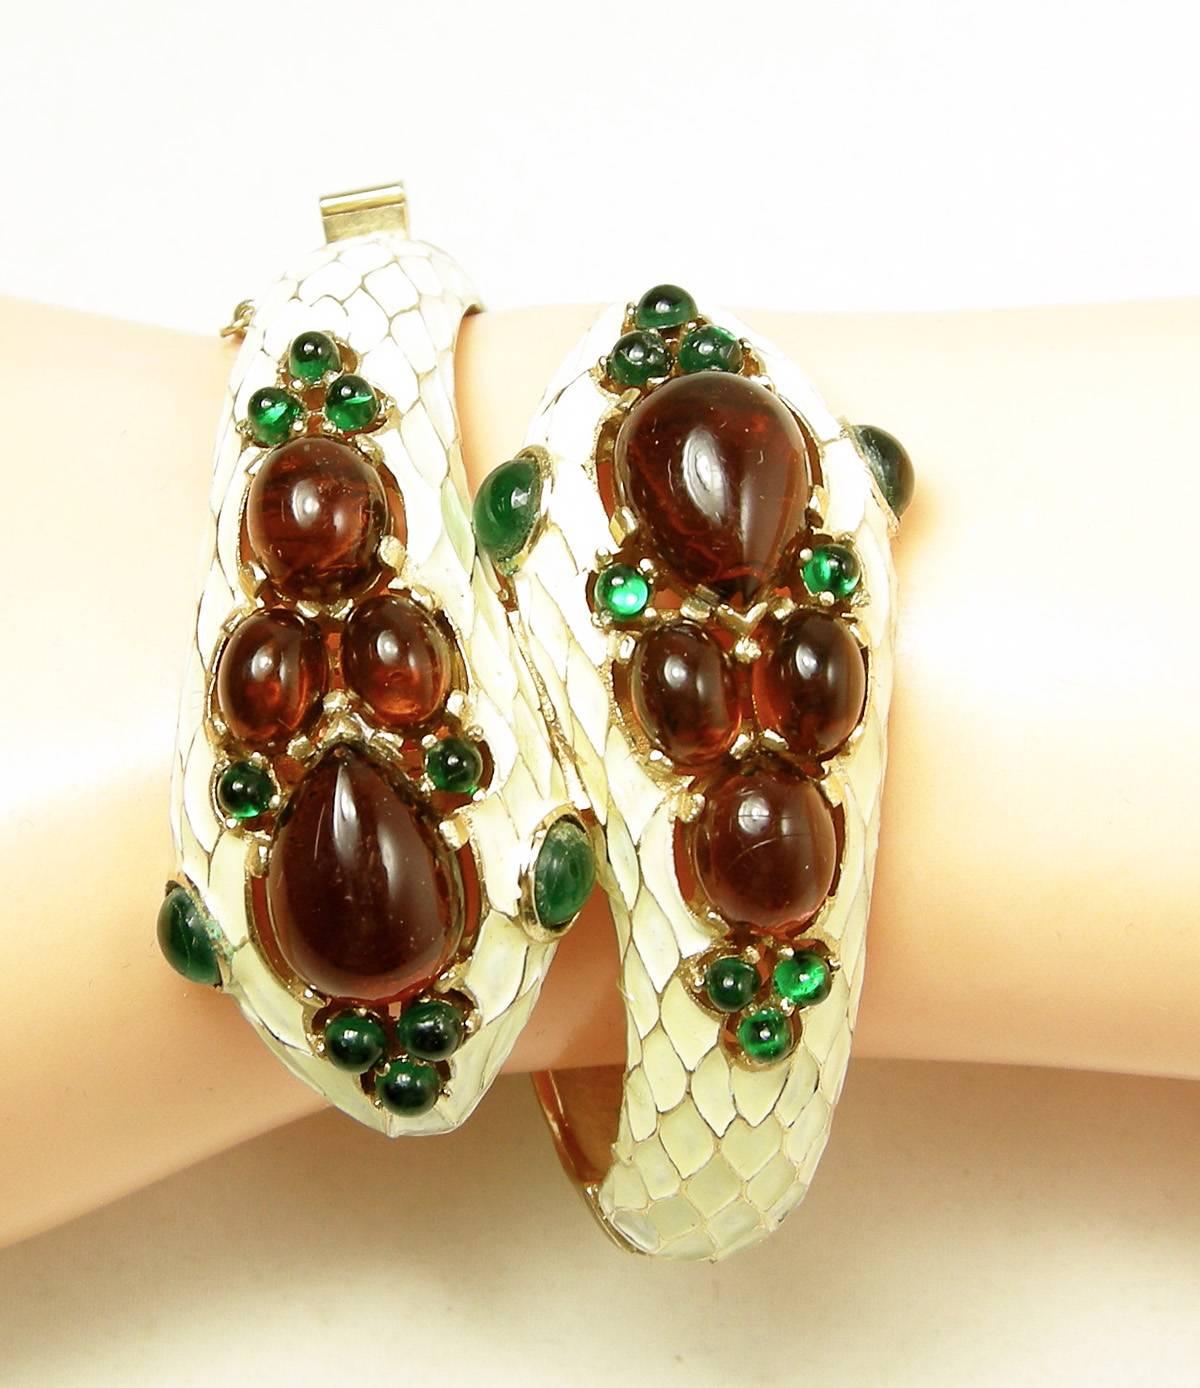 This is a great vintage Trifari snake bracelet.  It has topaz and green poured glass glass on white enamel scales accented with a gold tone metal finish.  It has a slide-in clasp with a safety chain and will fit a 6-1/2-7” wrist.  The snake heads